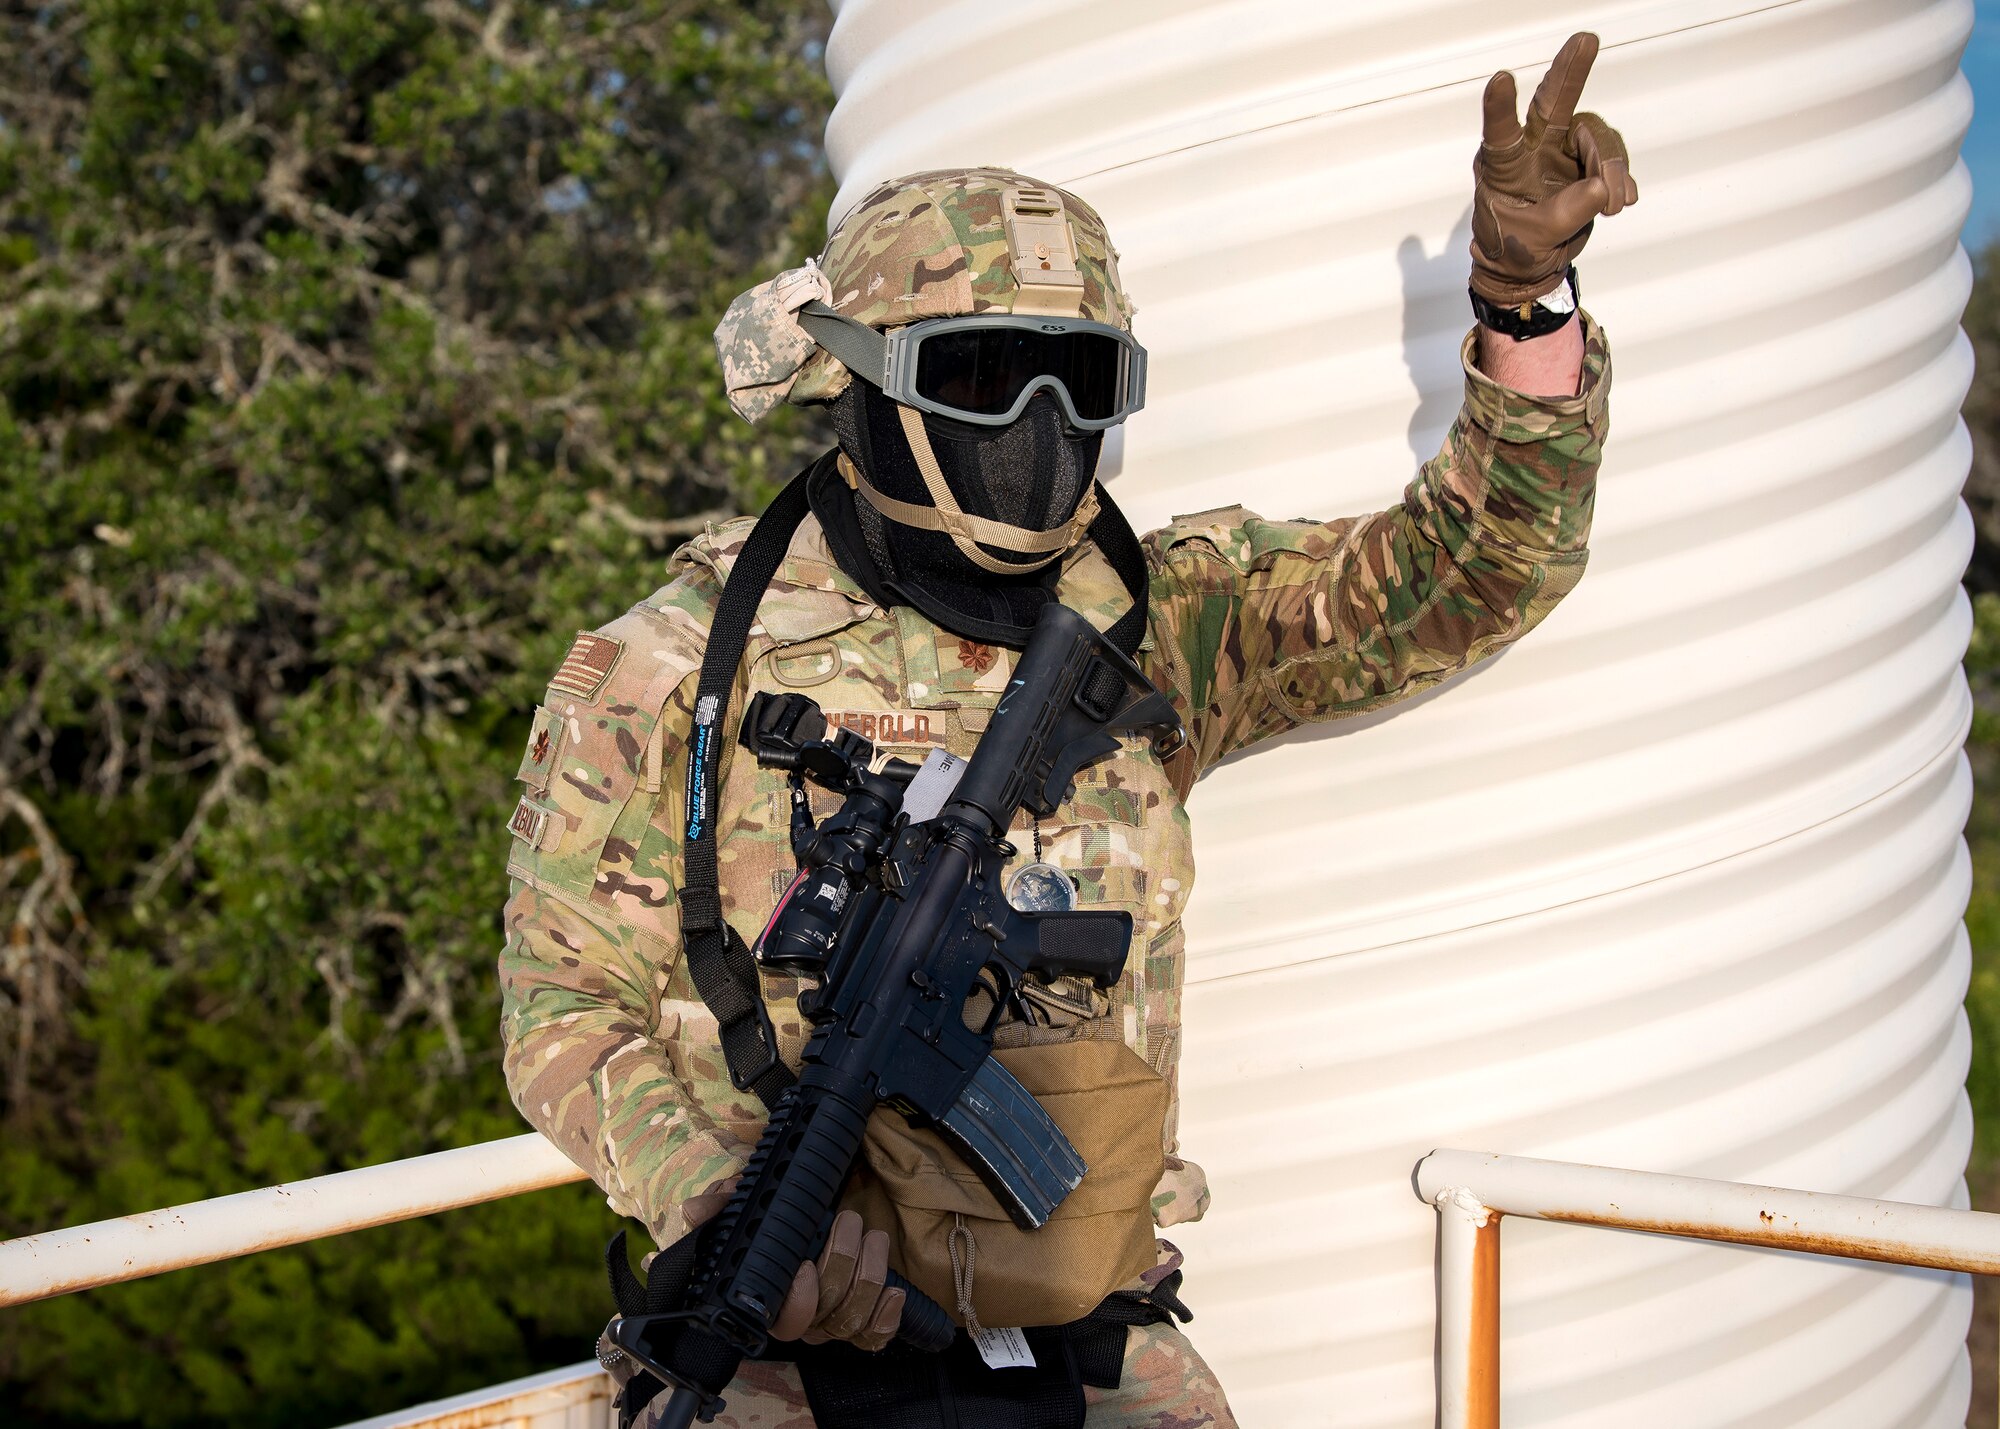 Maj. Zach Reinbold, 3d Weather Squadron Det 1 commander, signals his fellow Airmen during a certification field exercise (CFX), July 29, 2019, at Camp Bowie Training Center, Texas. The CFX was designed to evaluate the squadron’s overall tactical ability and readiness to provide the U.S. Army with full spectrum environmental support to the Joint Task Force (JTF) fight. The CFX immersed Airmen into all the aspects of what could come with a deployment such as force on force scenarios. (U.S. Air Force photo by Airman 1st Class Eugene Oliver)